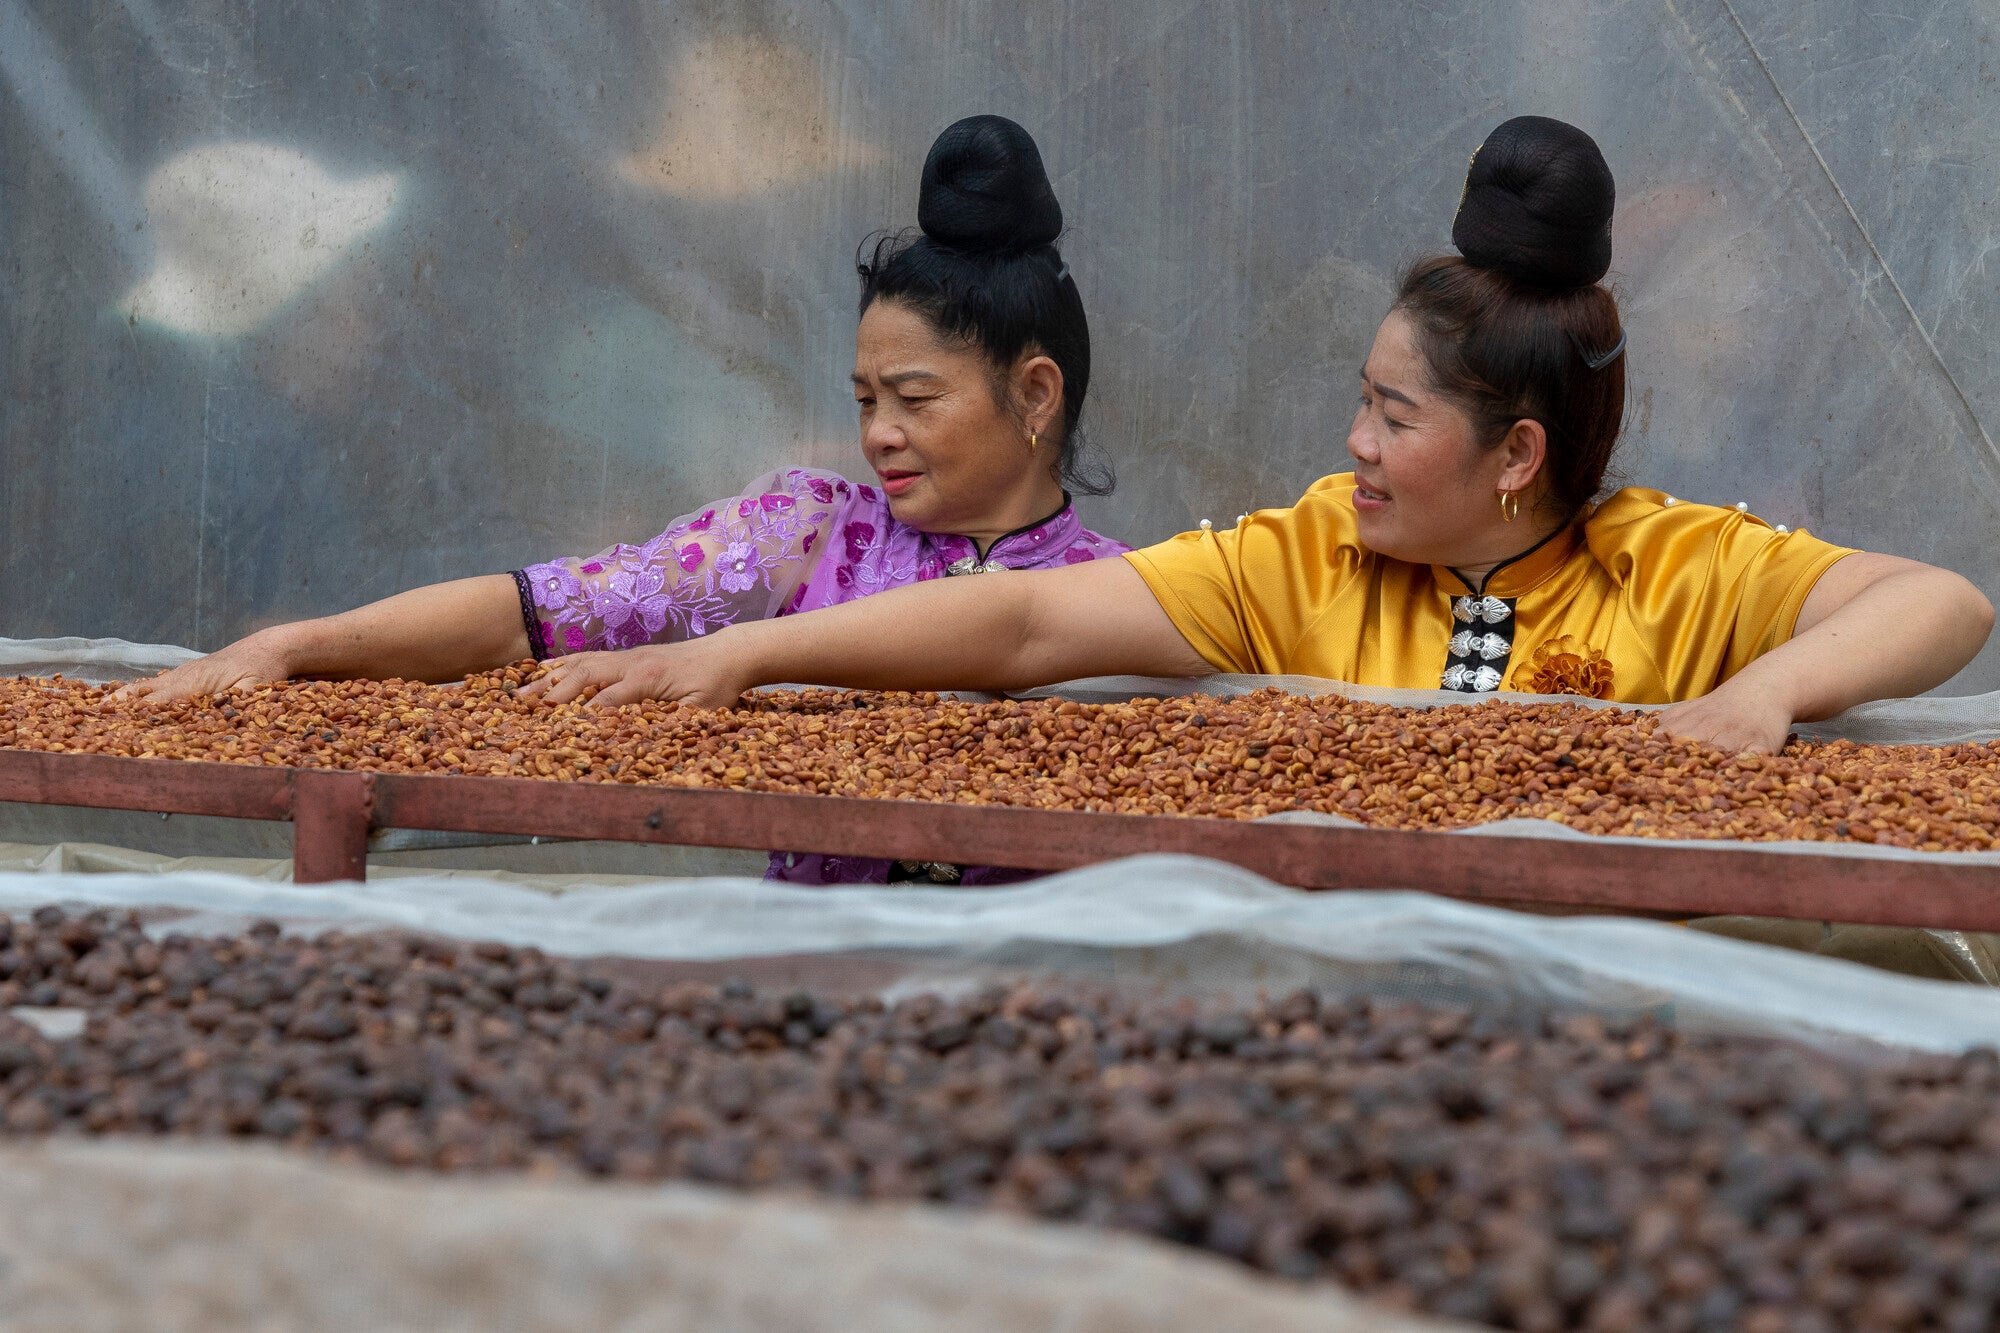 Two women in traditional dress and high hair buns spread beans on a flat surface